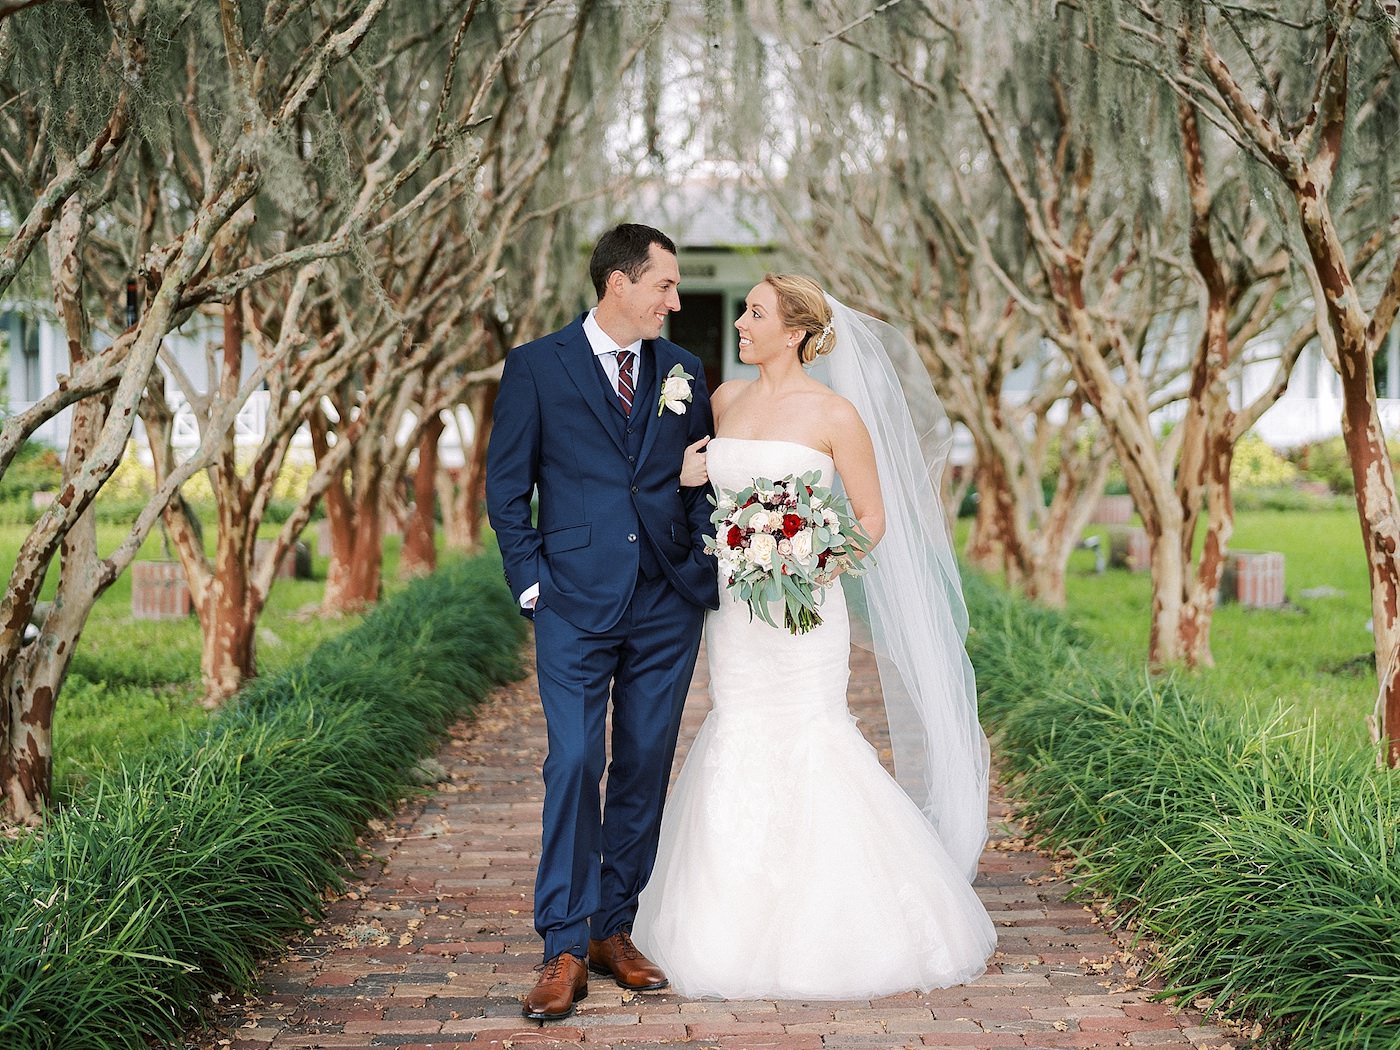 Bride and Groom Outdoor Portrait in Tree Lined Path | Strapless Ivory Tulle Rouched Mermaid Vera Wang Bridal Gown with Rhinestone Beaded Sash Waistband | Burgundy Wine Bordeaux Red and White Bridal Bouquet with Eucalyptus Greenery by Tampa Wedding Florist Brides N Blooms | Groom in Classic Navy Blue Suit